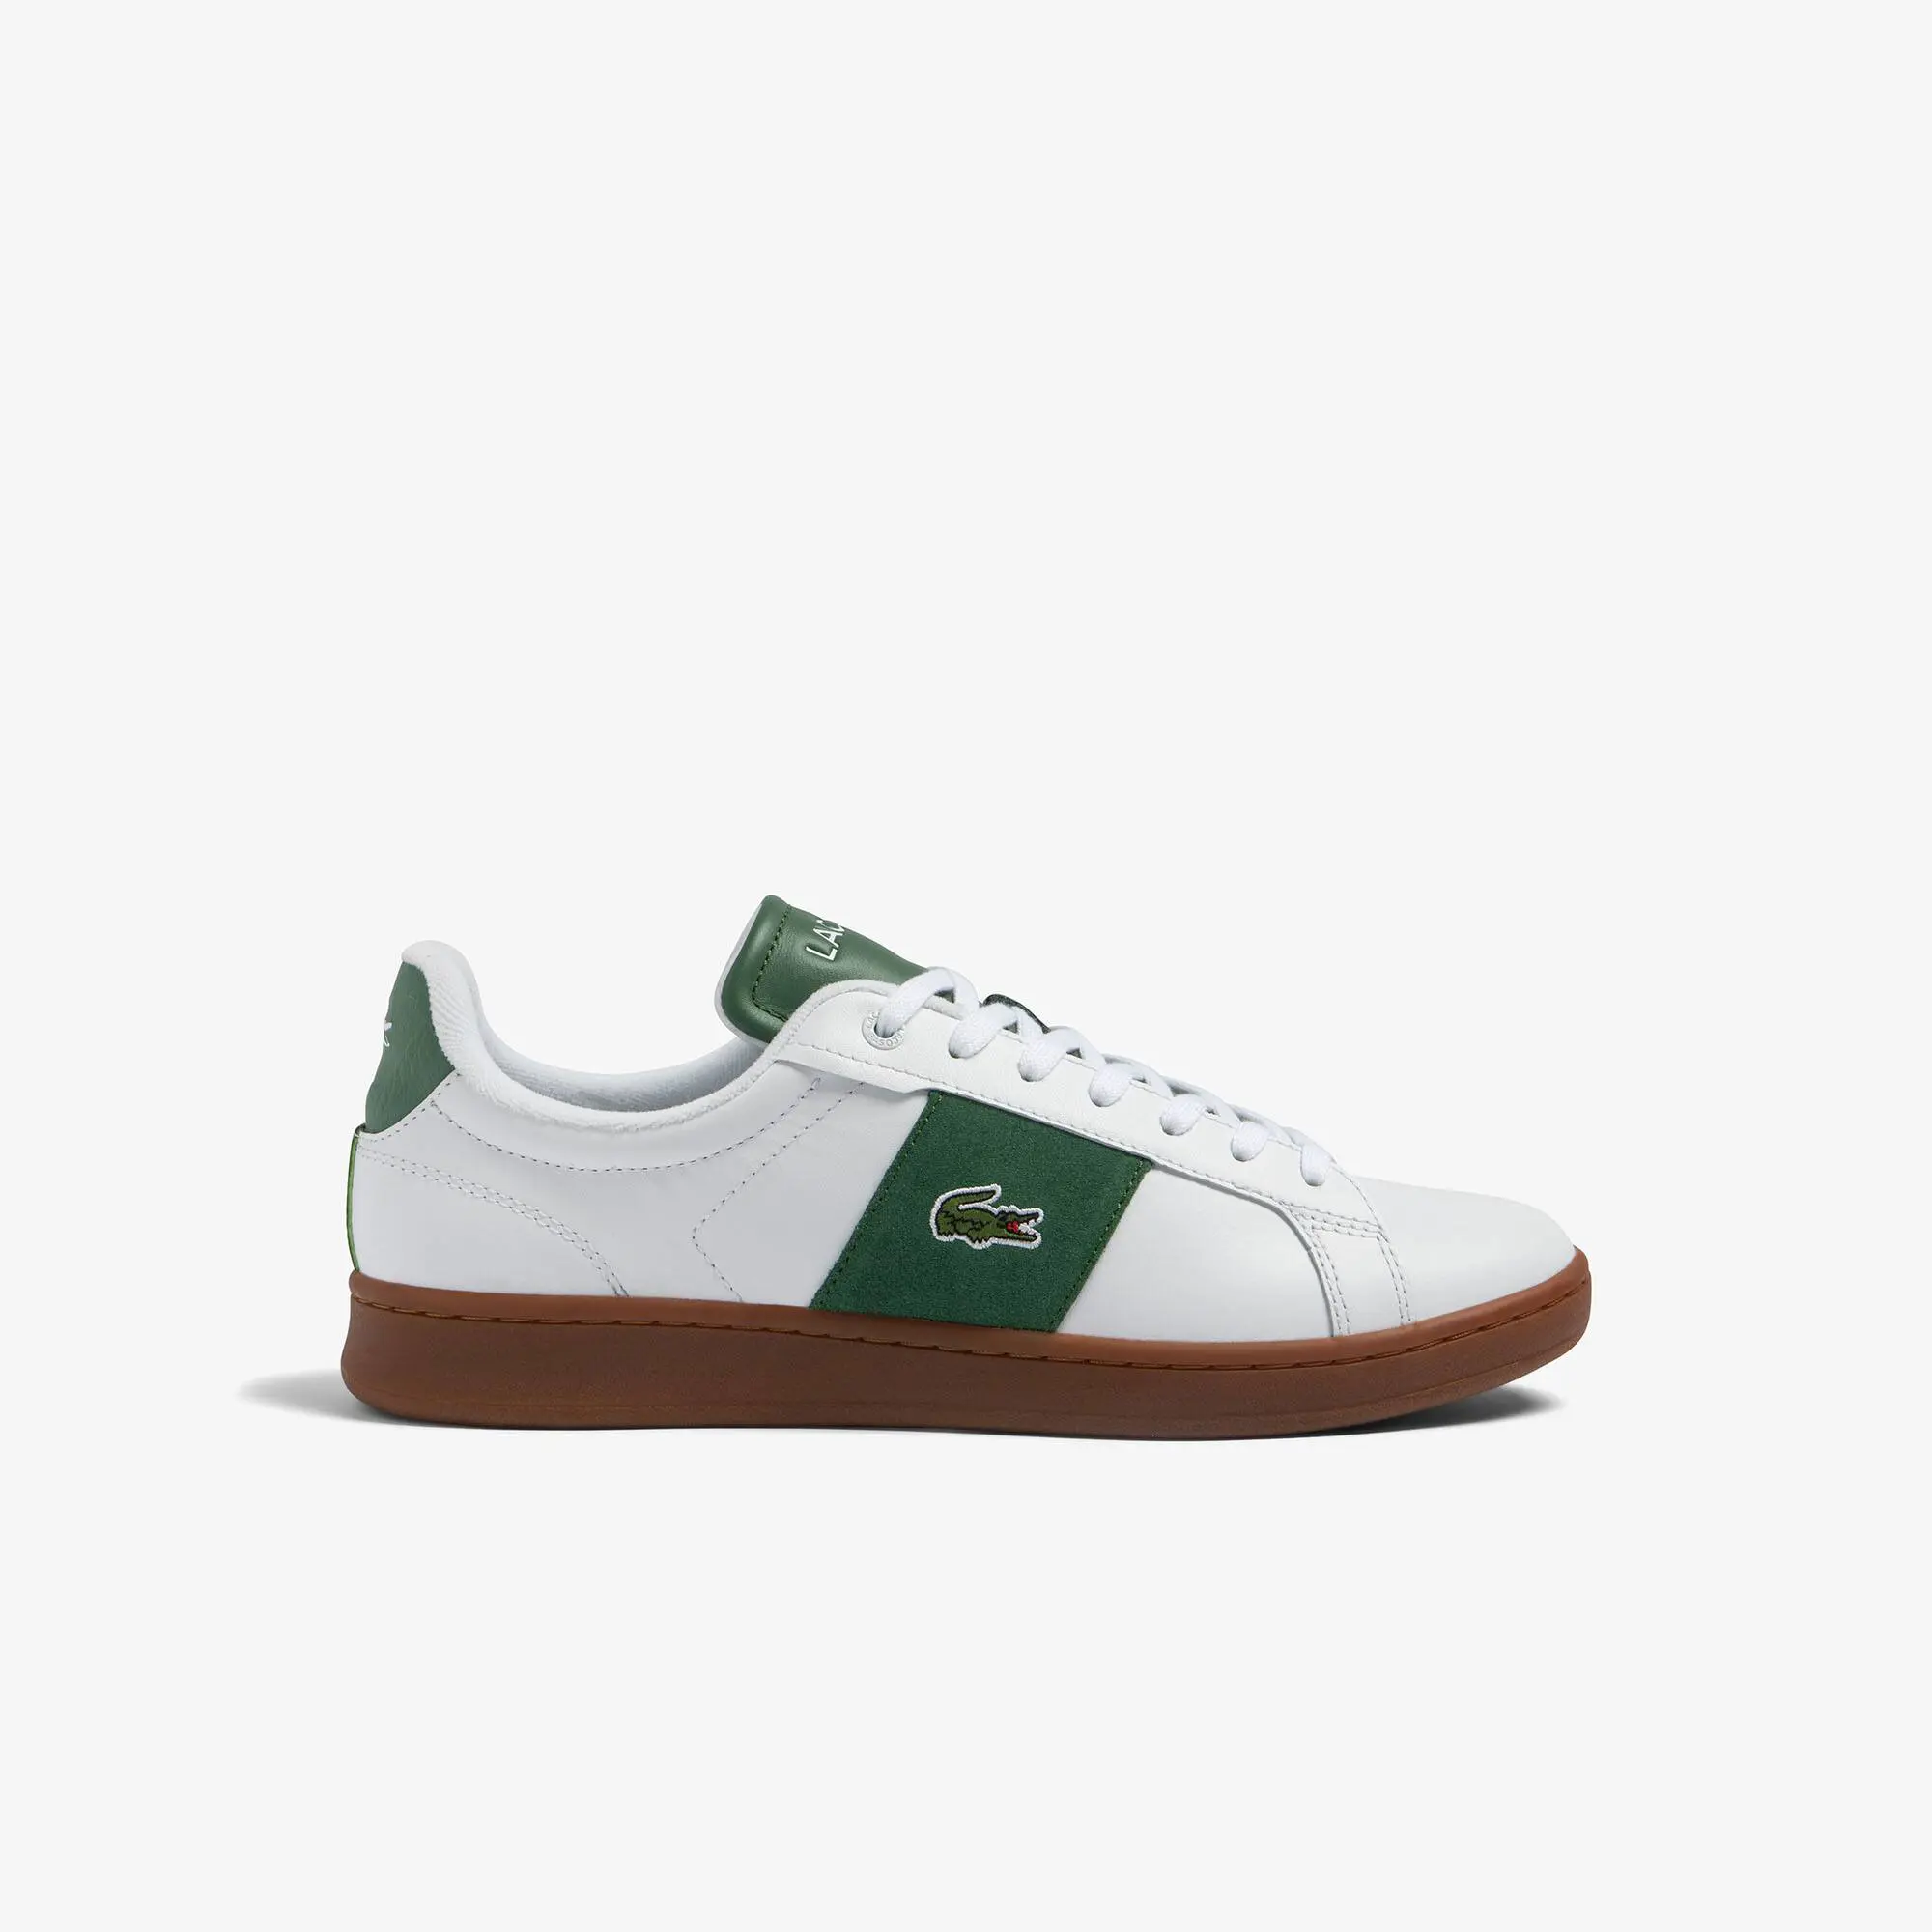 Lacoste Men's Lacoste Carnaby Pro Leather Colour Pop Trainers. 1